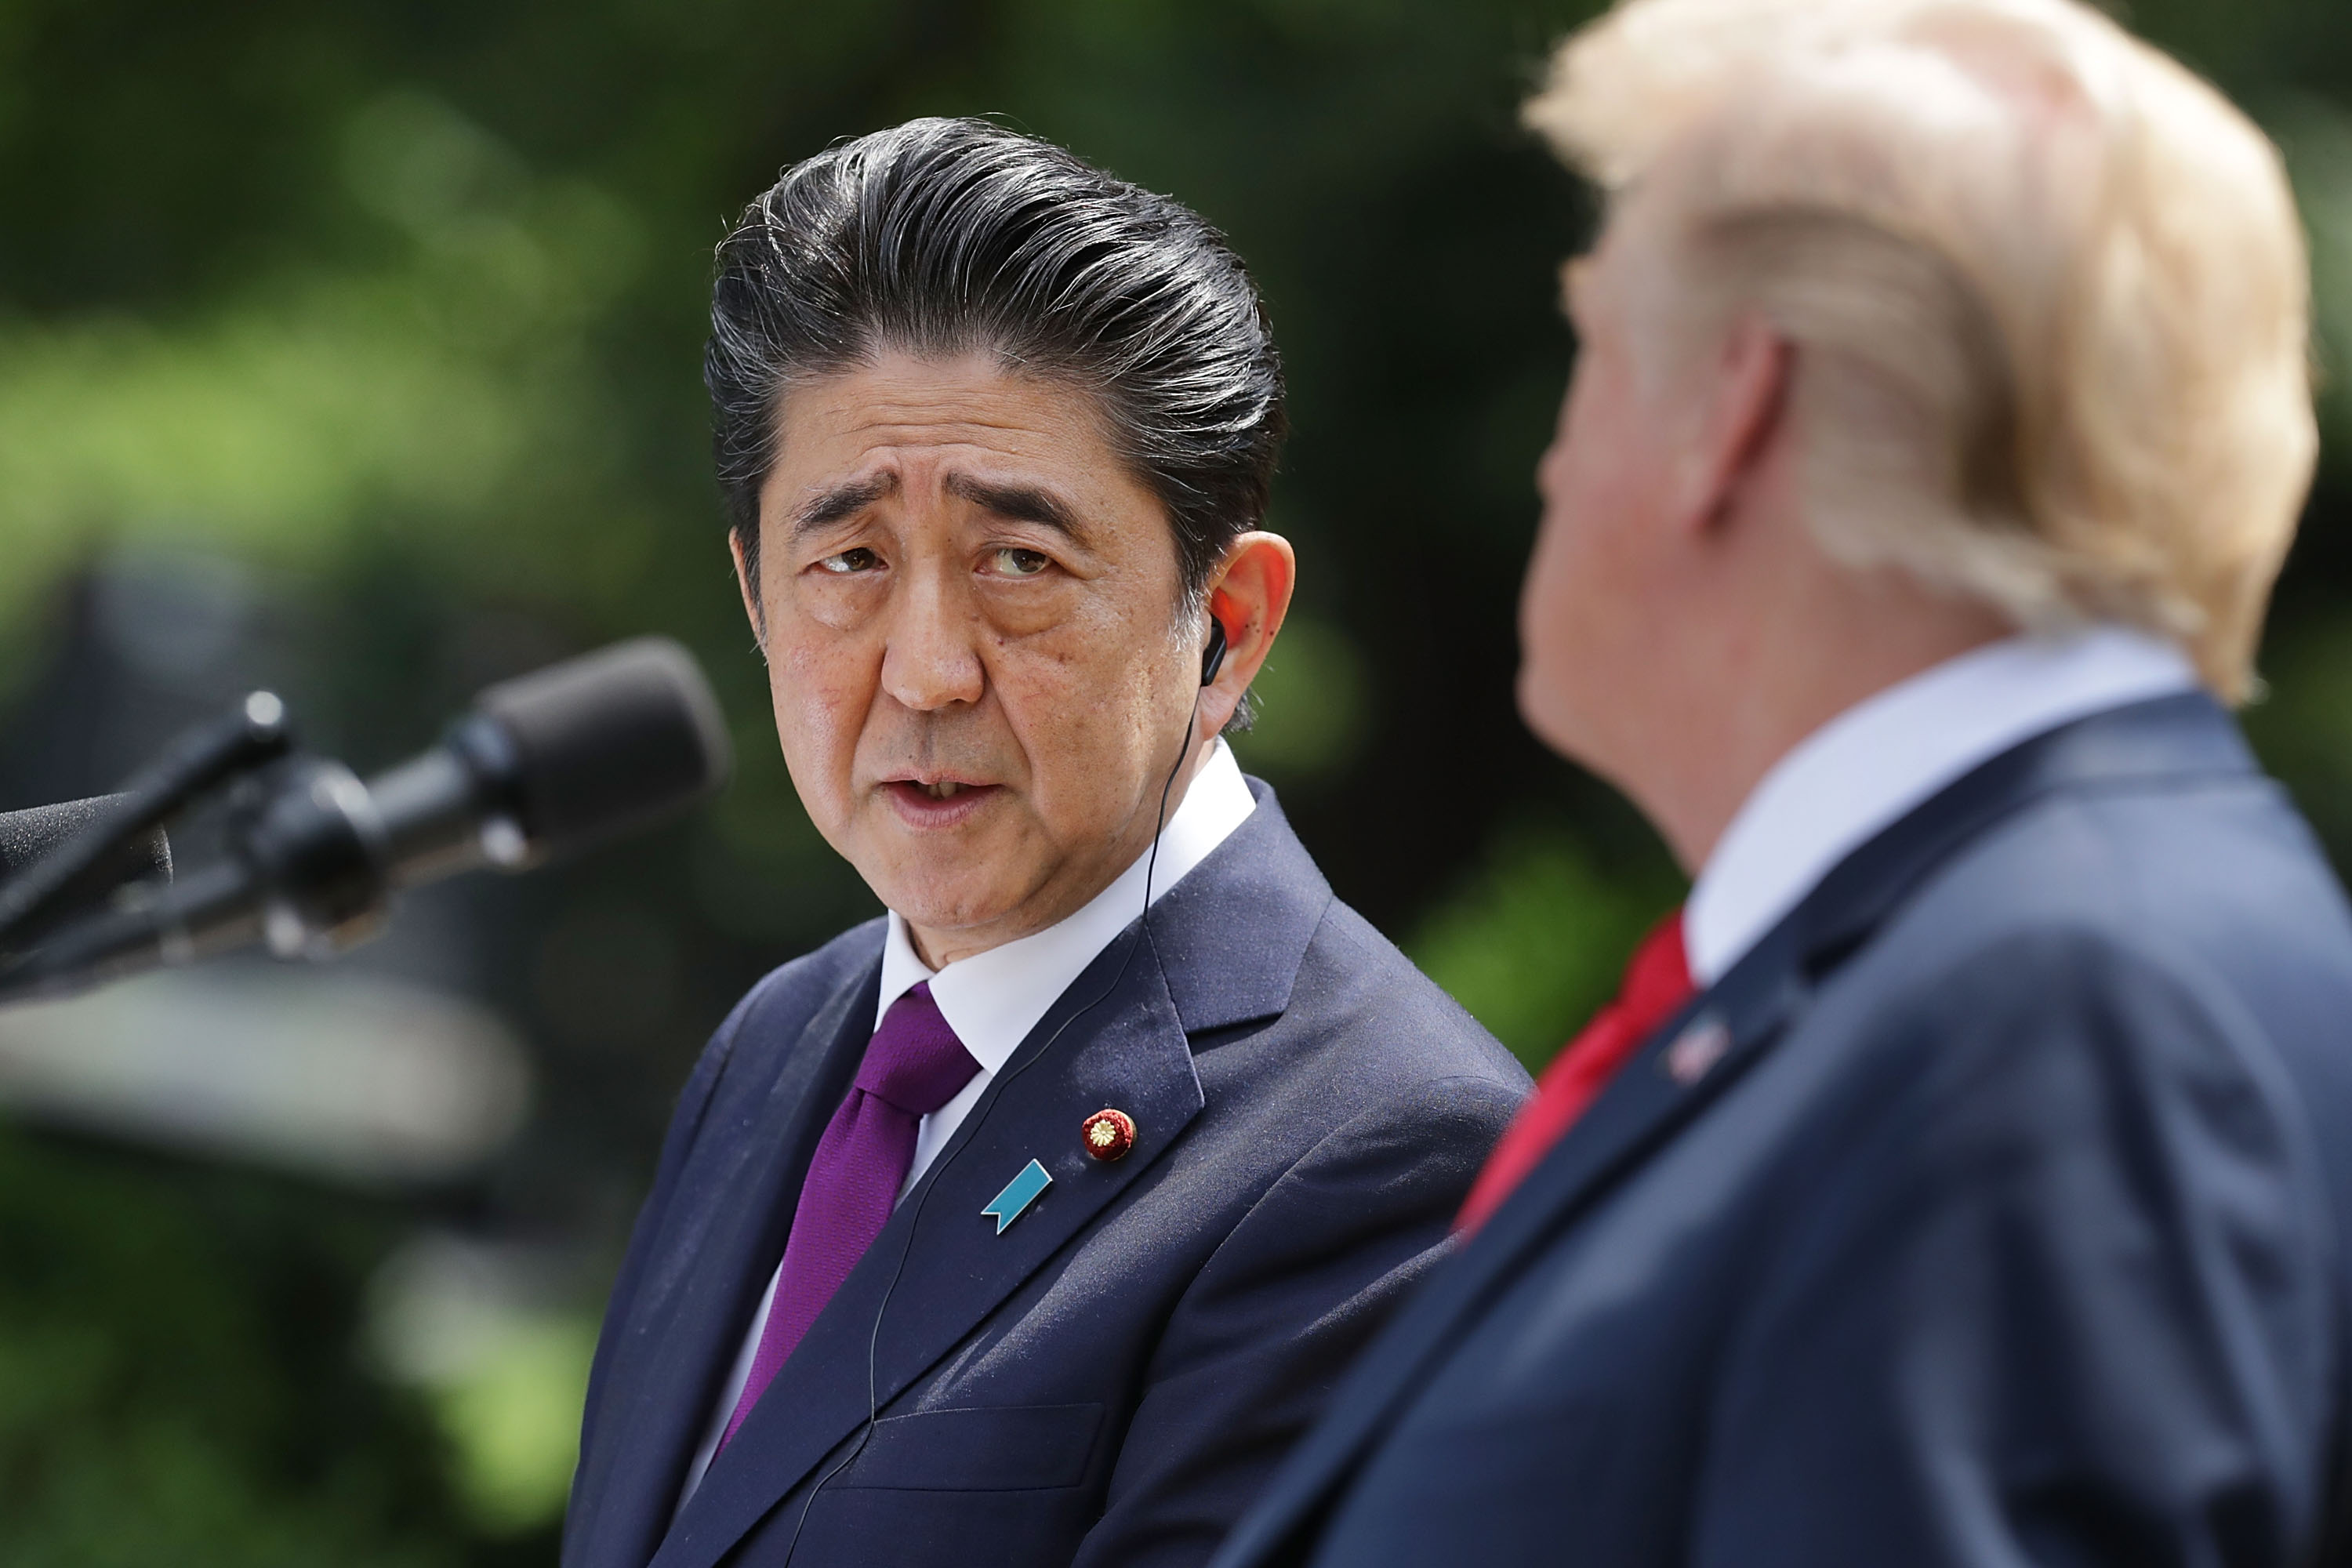 Japanese Prime Minister Shinzo Abe looks at President Donald Trump during a joint news conference at the White House on June 7, 2018 in Washington, DC. (Chip Somodevilla&mdash;Getty Images)